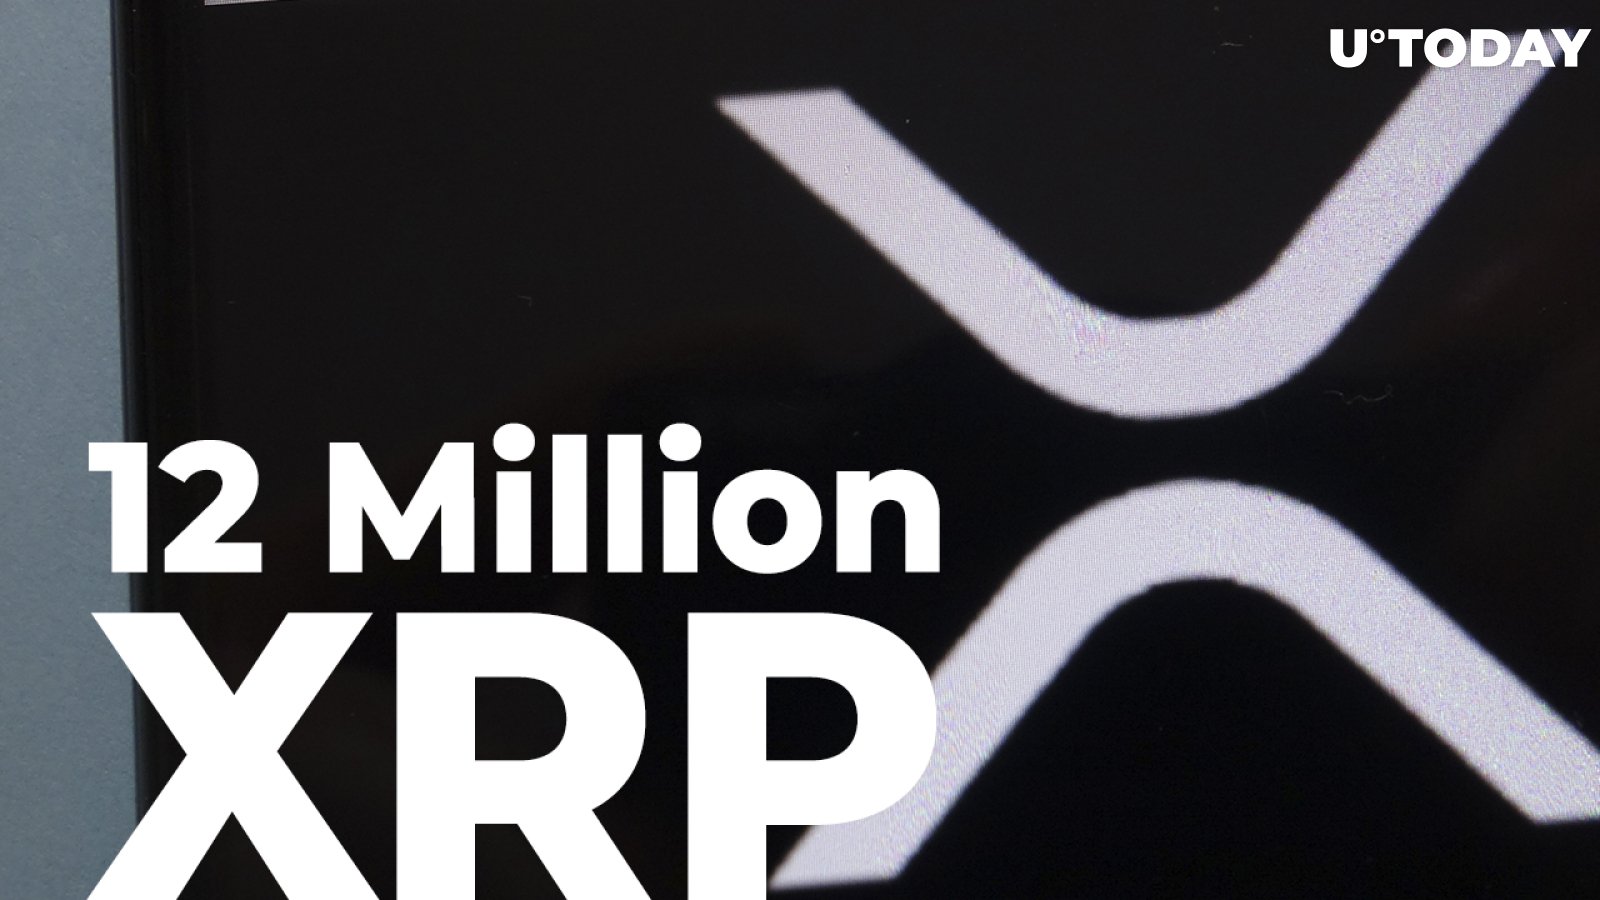 12 Million XRP Goes to Anon Address as XRP Remains Attractive for Investors